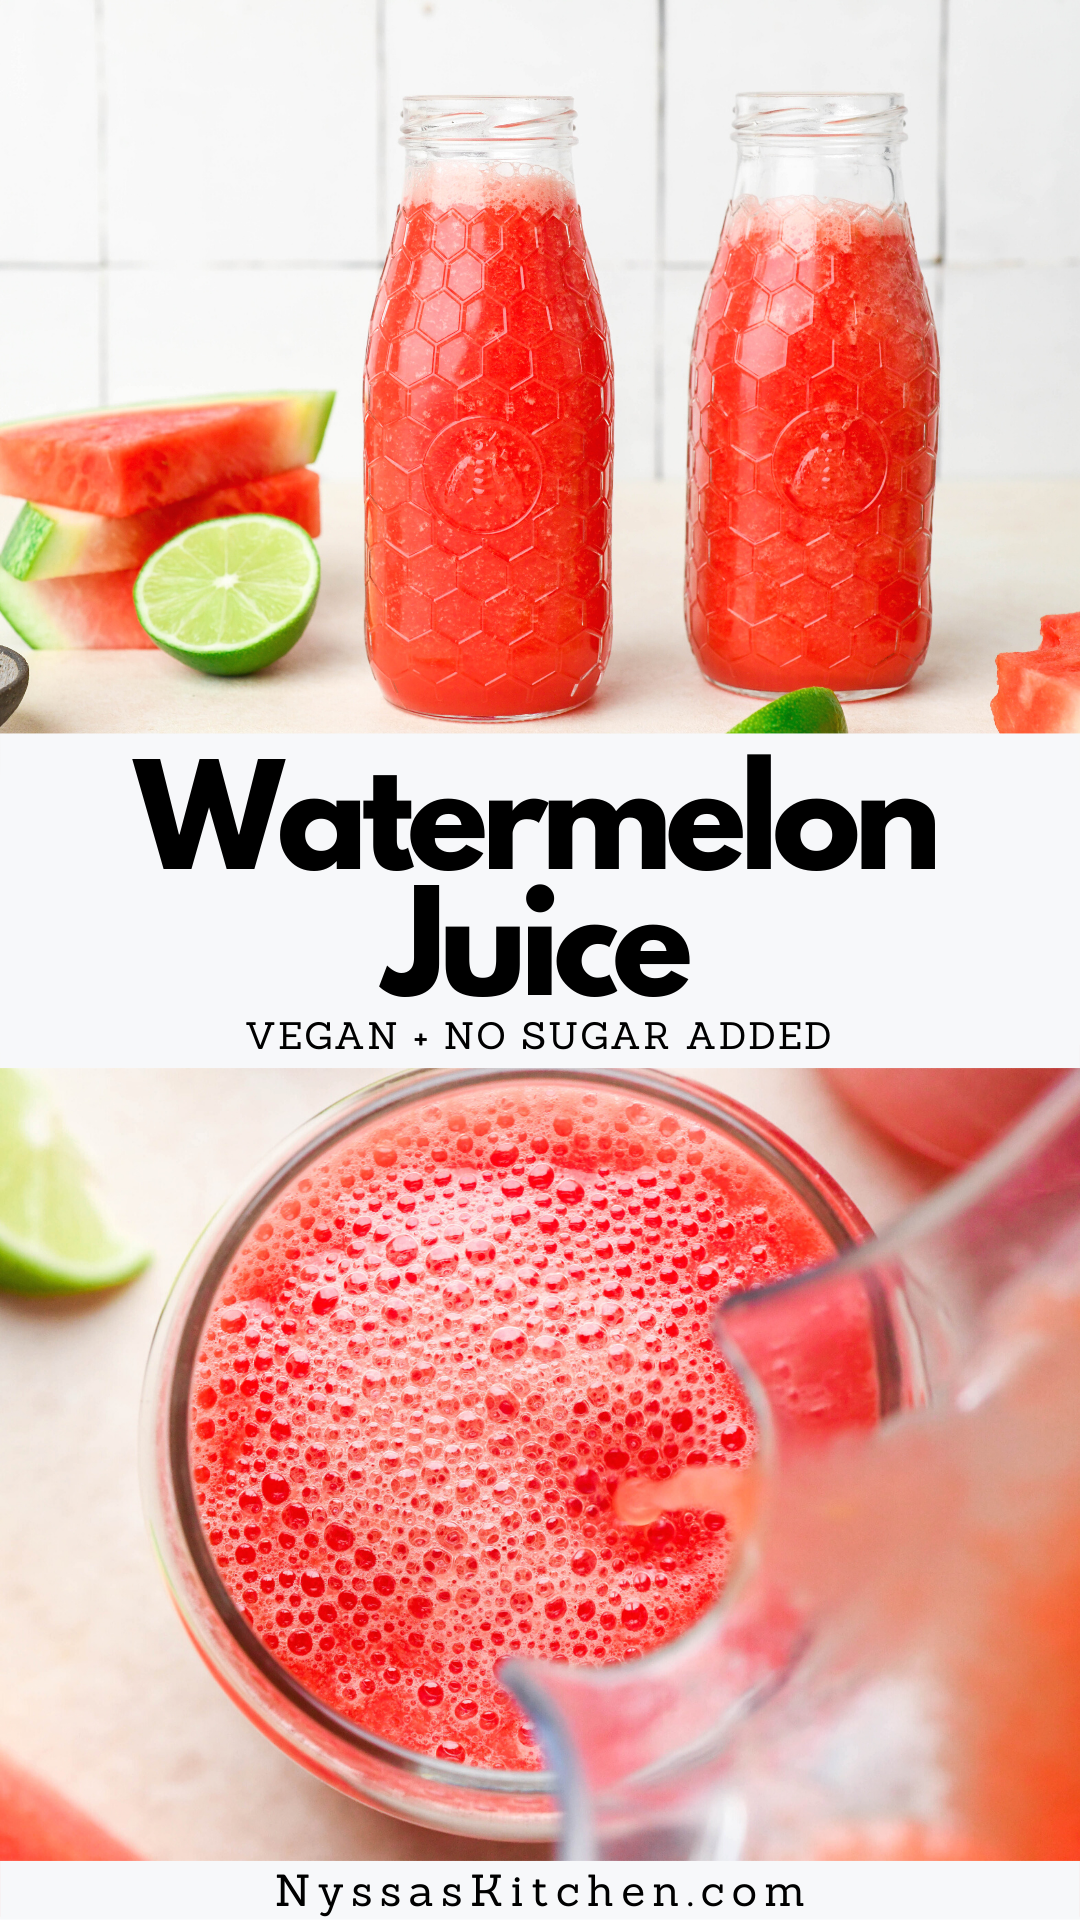 This easy watermelon juice is the most refreshing nutrient dense drink! Perfect for a hot summer day when you're in need of some delicious hydration. Made with only 3 ingredients and without a juicer. Vegan, dairy free, gluten free, no added sugar.